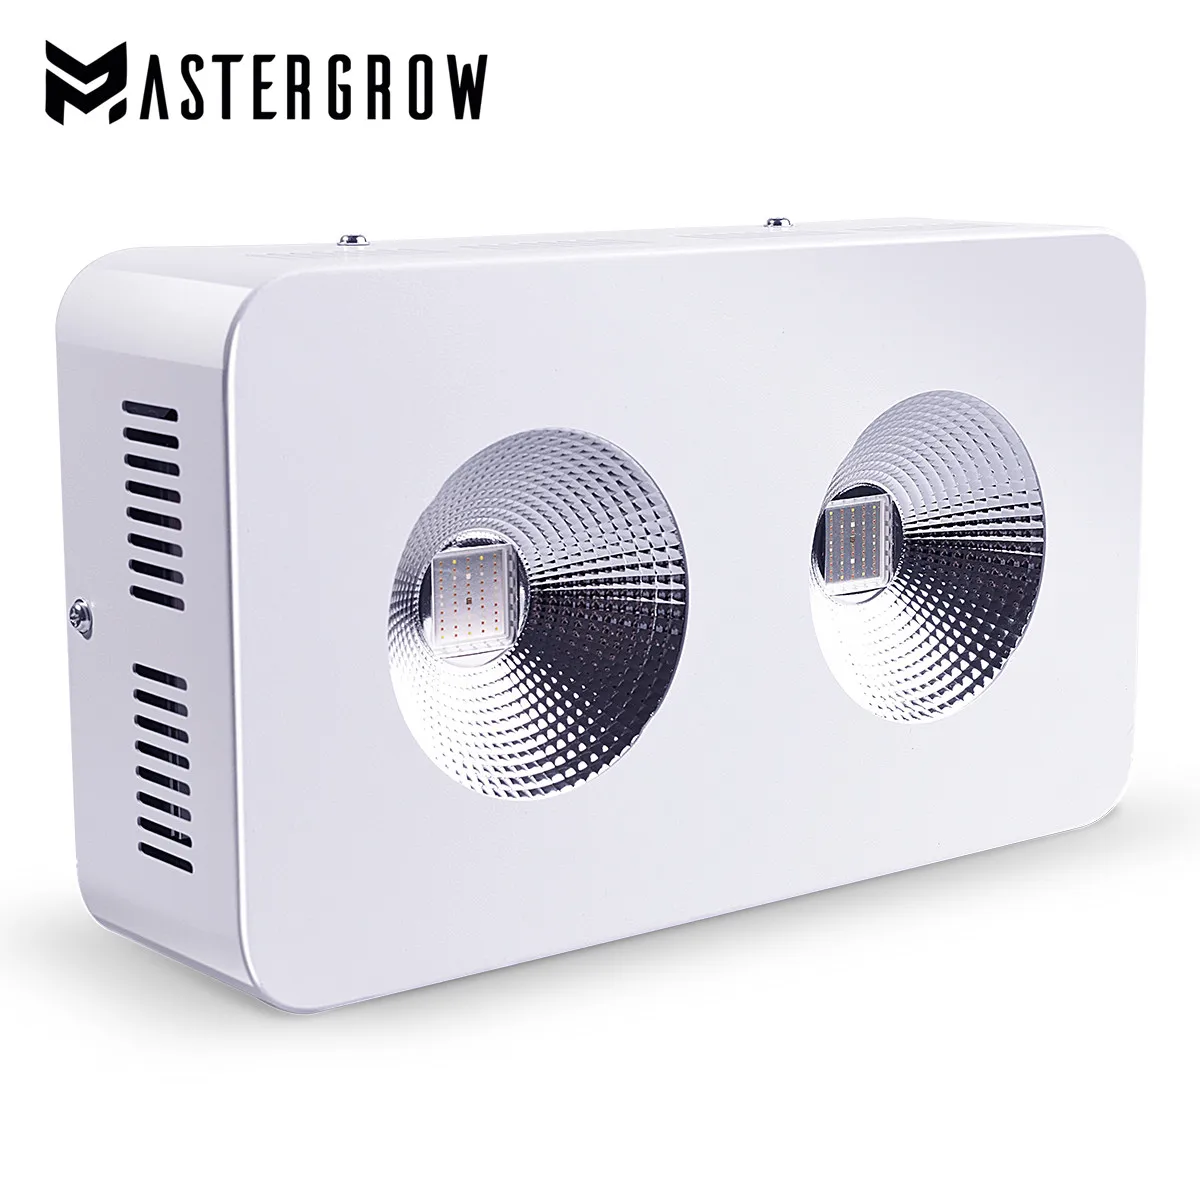 MasterGrow Dominator 300w/600w/1200w/1800w/2700w Full Spectrum COB LED Grow Light 410-730nm With Big Lens For Indoor All  Plants